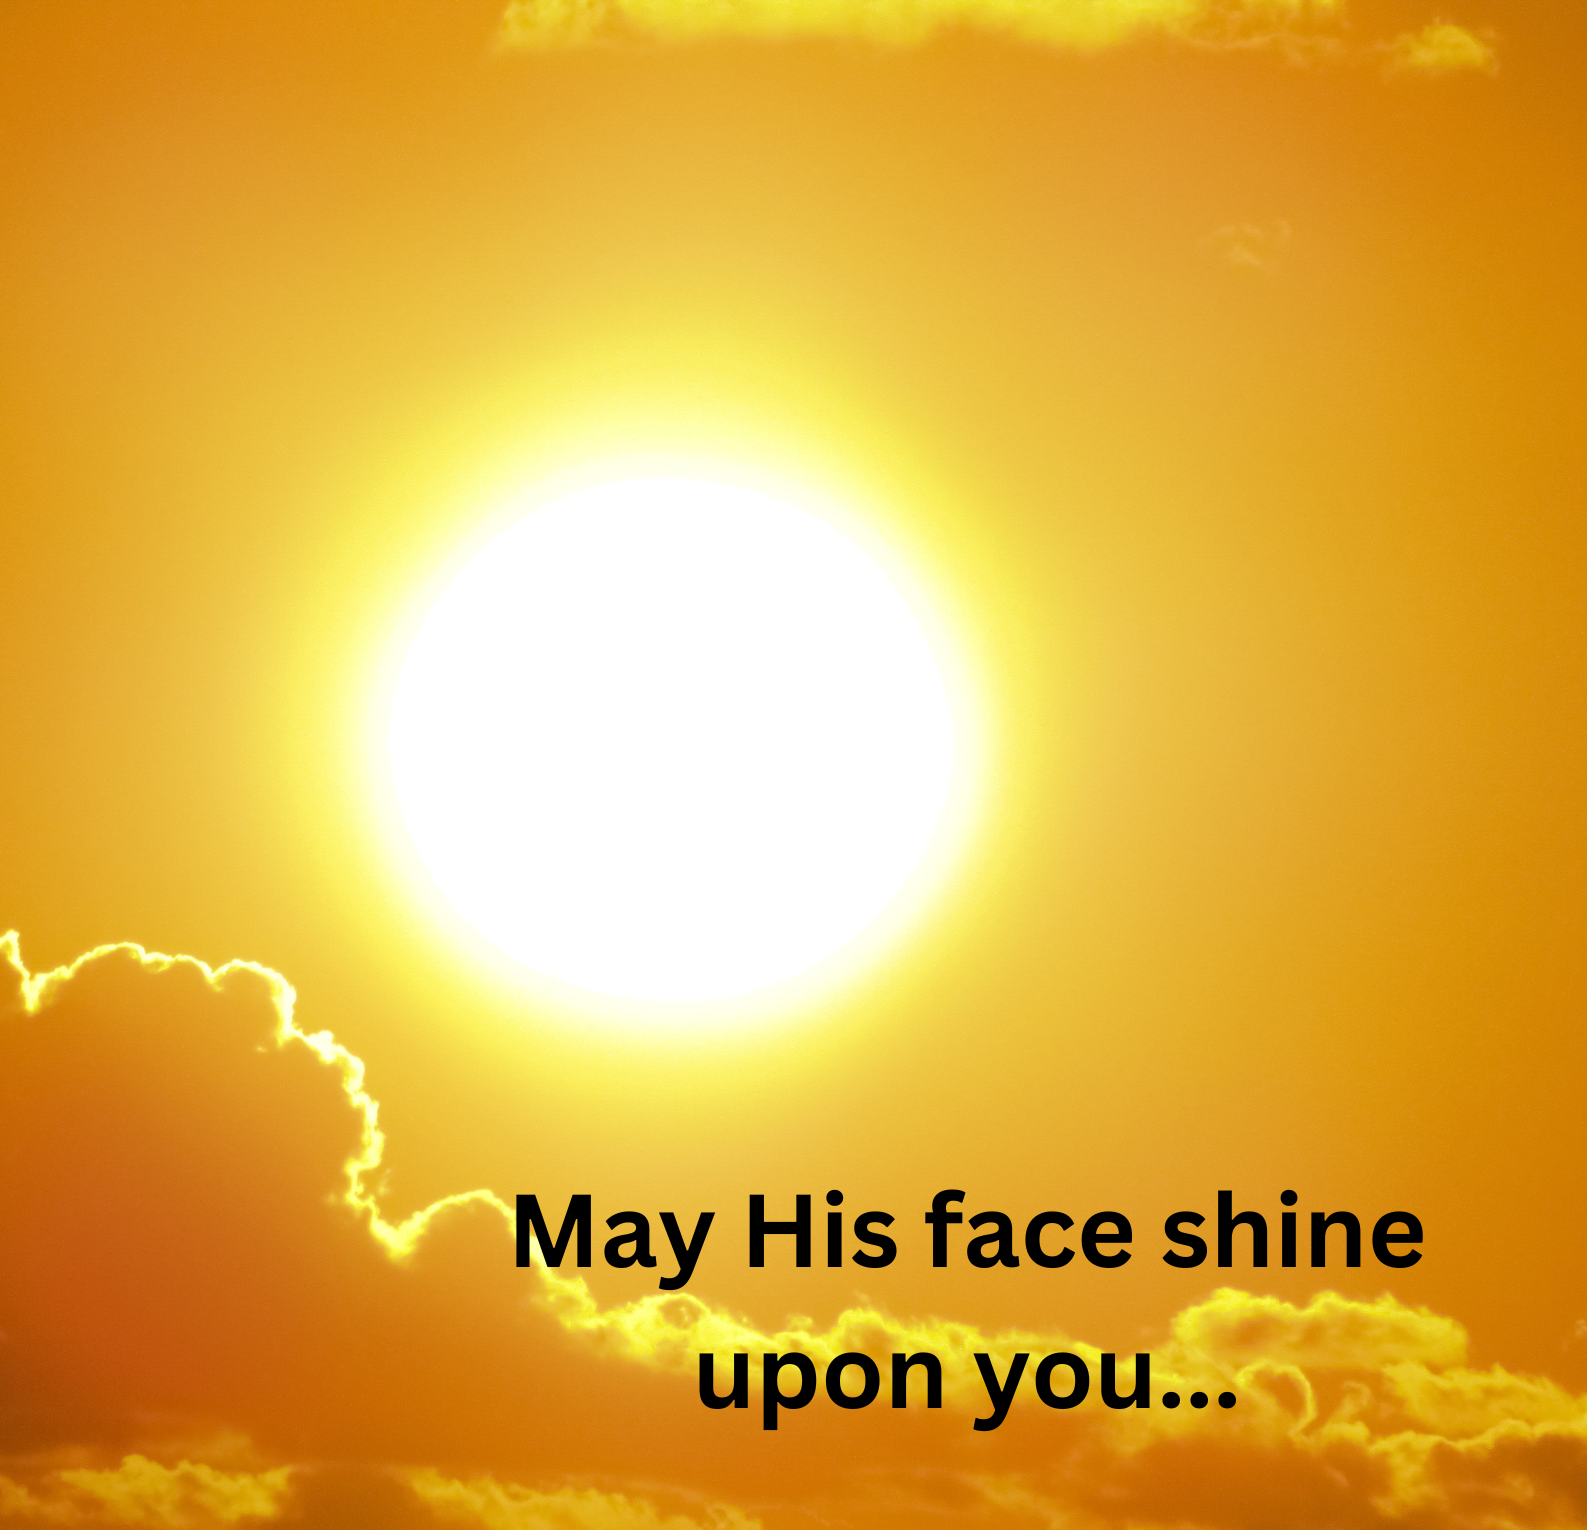 May His face shine upon you